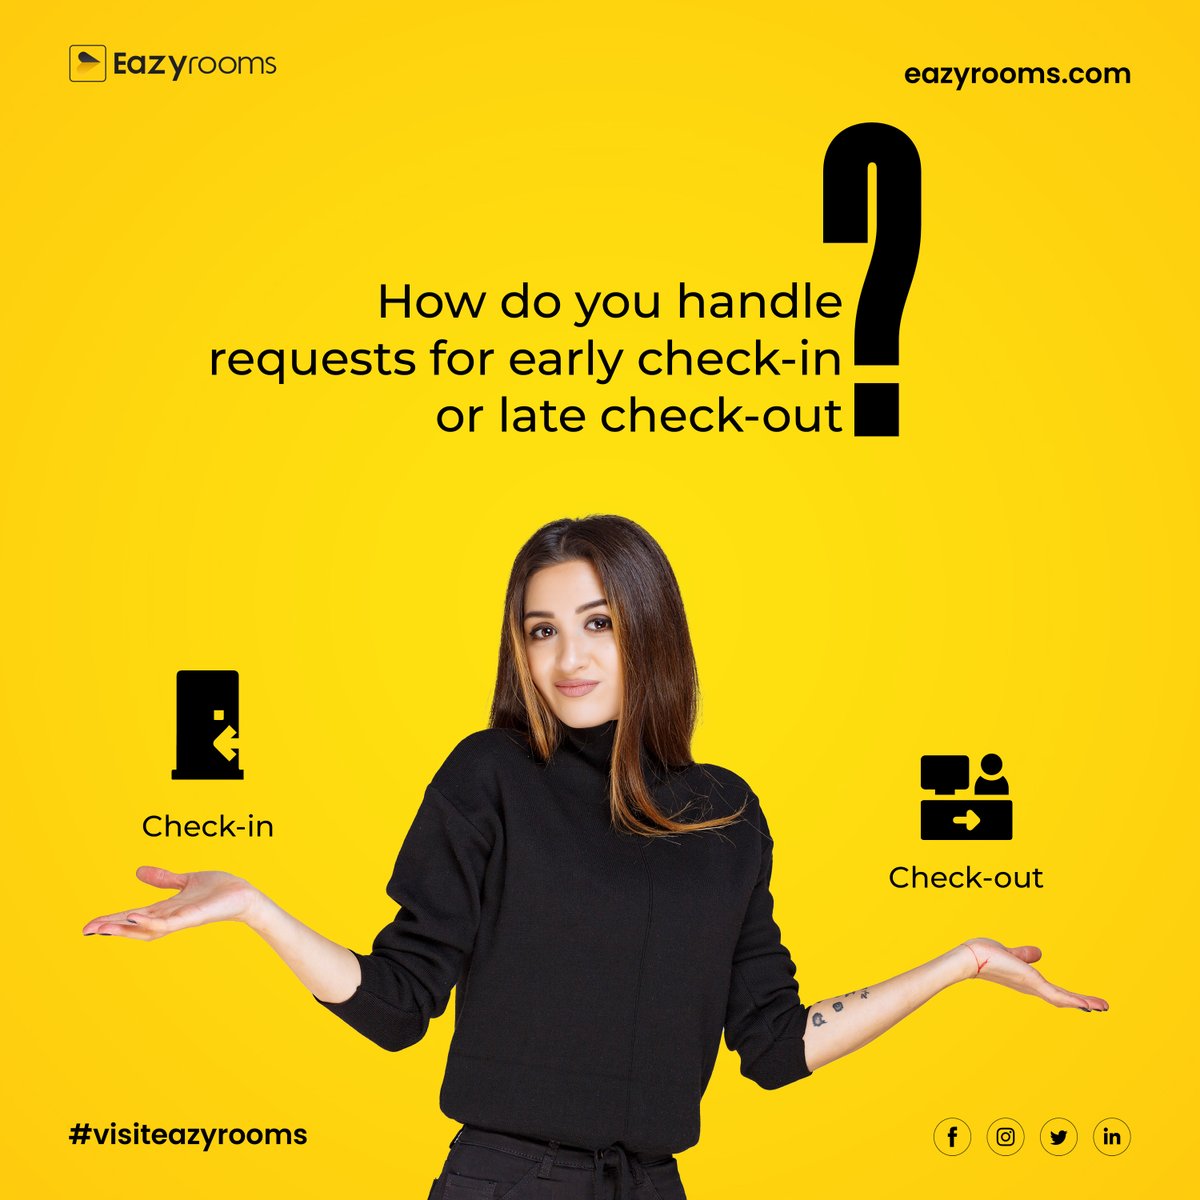 As a hotelier, handling requests for early check-in and late check-out can be challenging.
.
.
.
#Eazyrooms #hotelguests #hotelowner #hotelownership #hotelgrowth #happyguests #hotelautomation #hotelmanagement #oneclickaway #oneclickservices #seamlessservices #guestcommunication